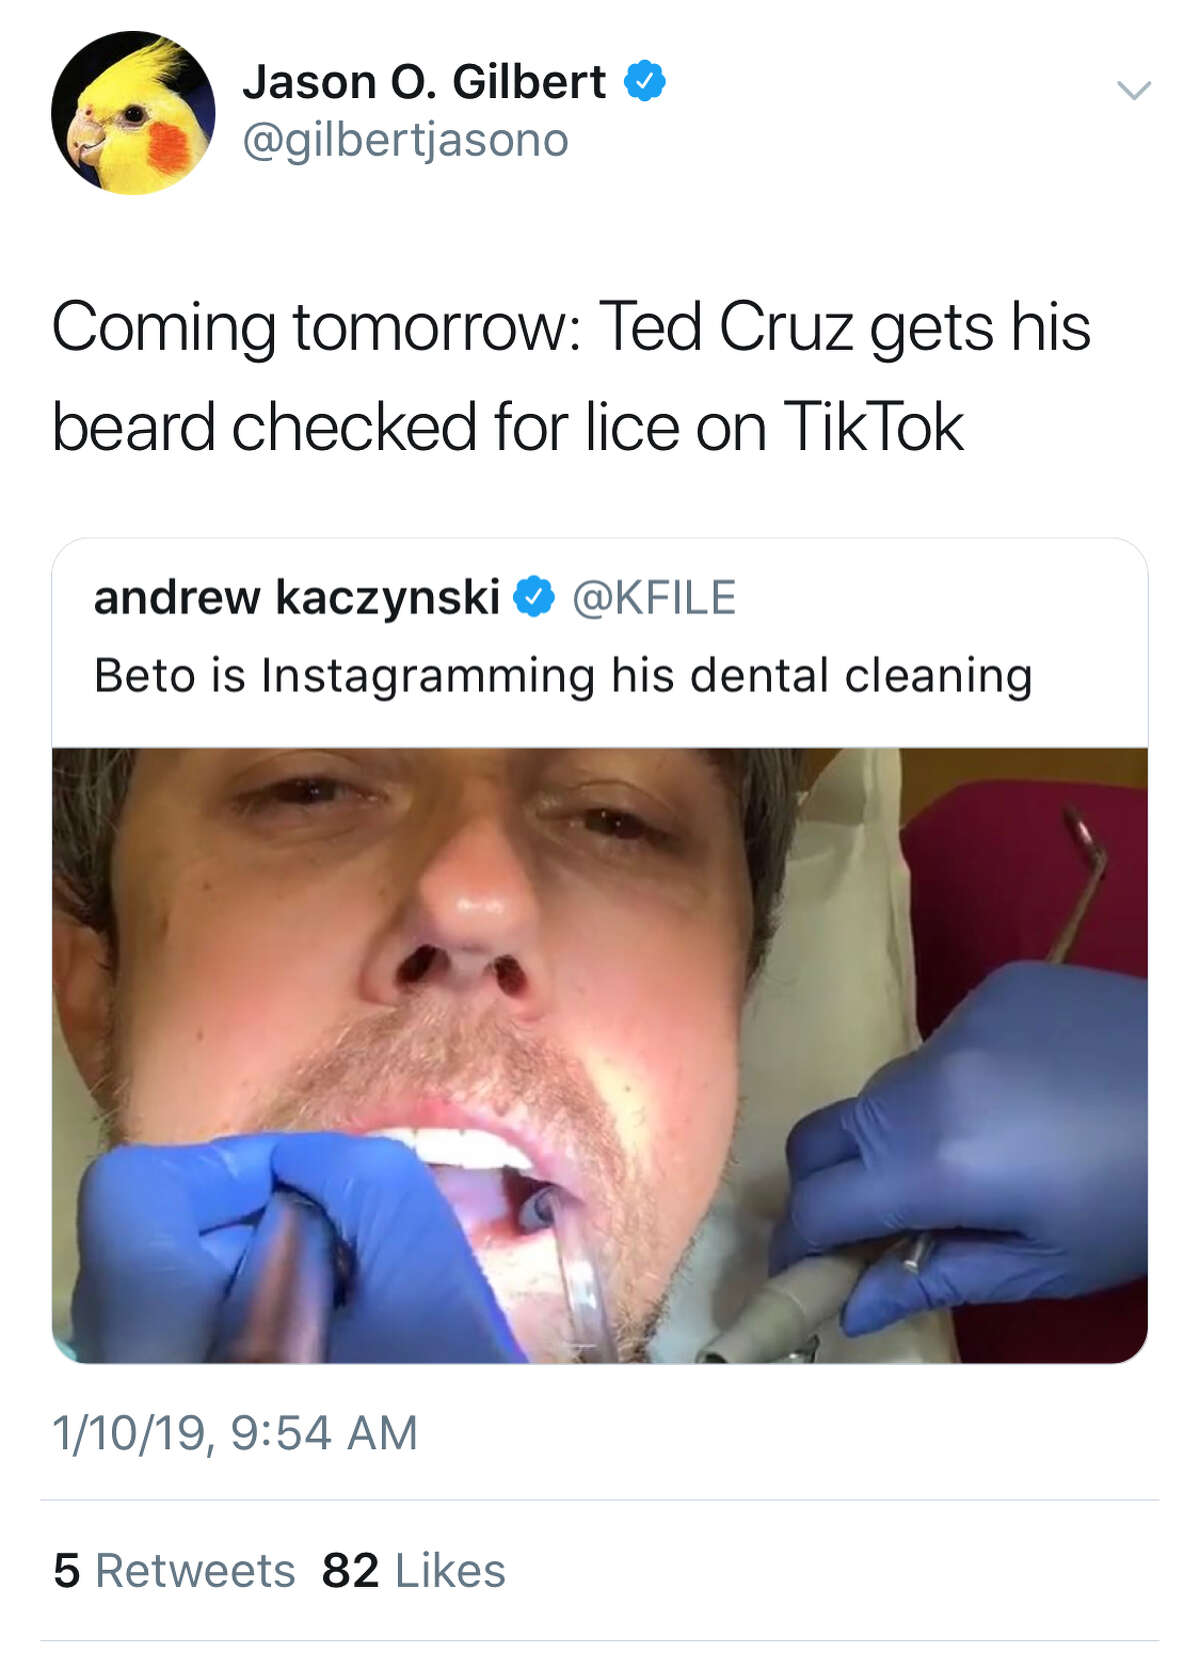 People had strong feelings about a video Beto O'Rourke posted from his dentist's office.